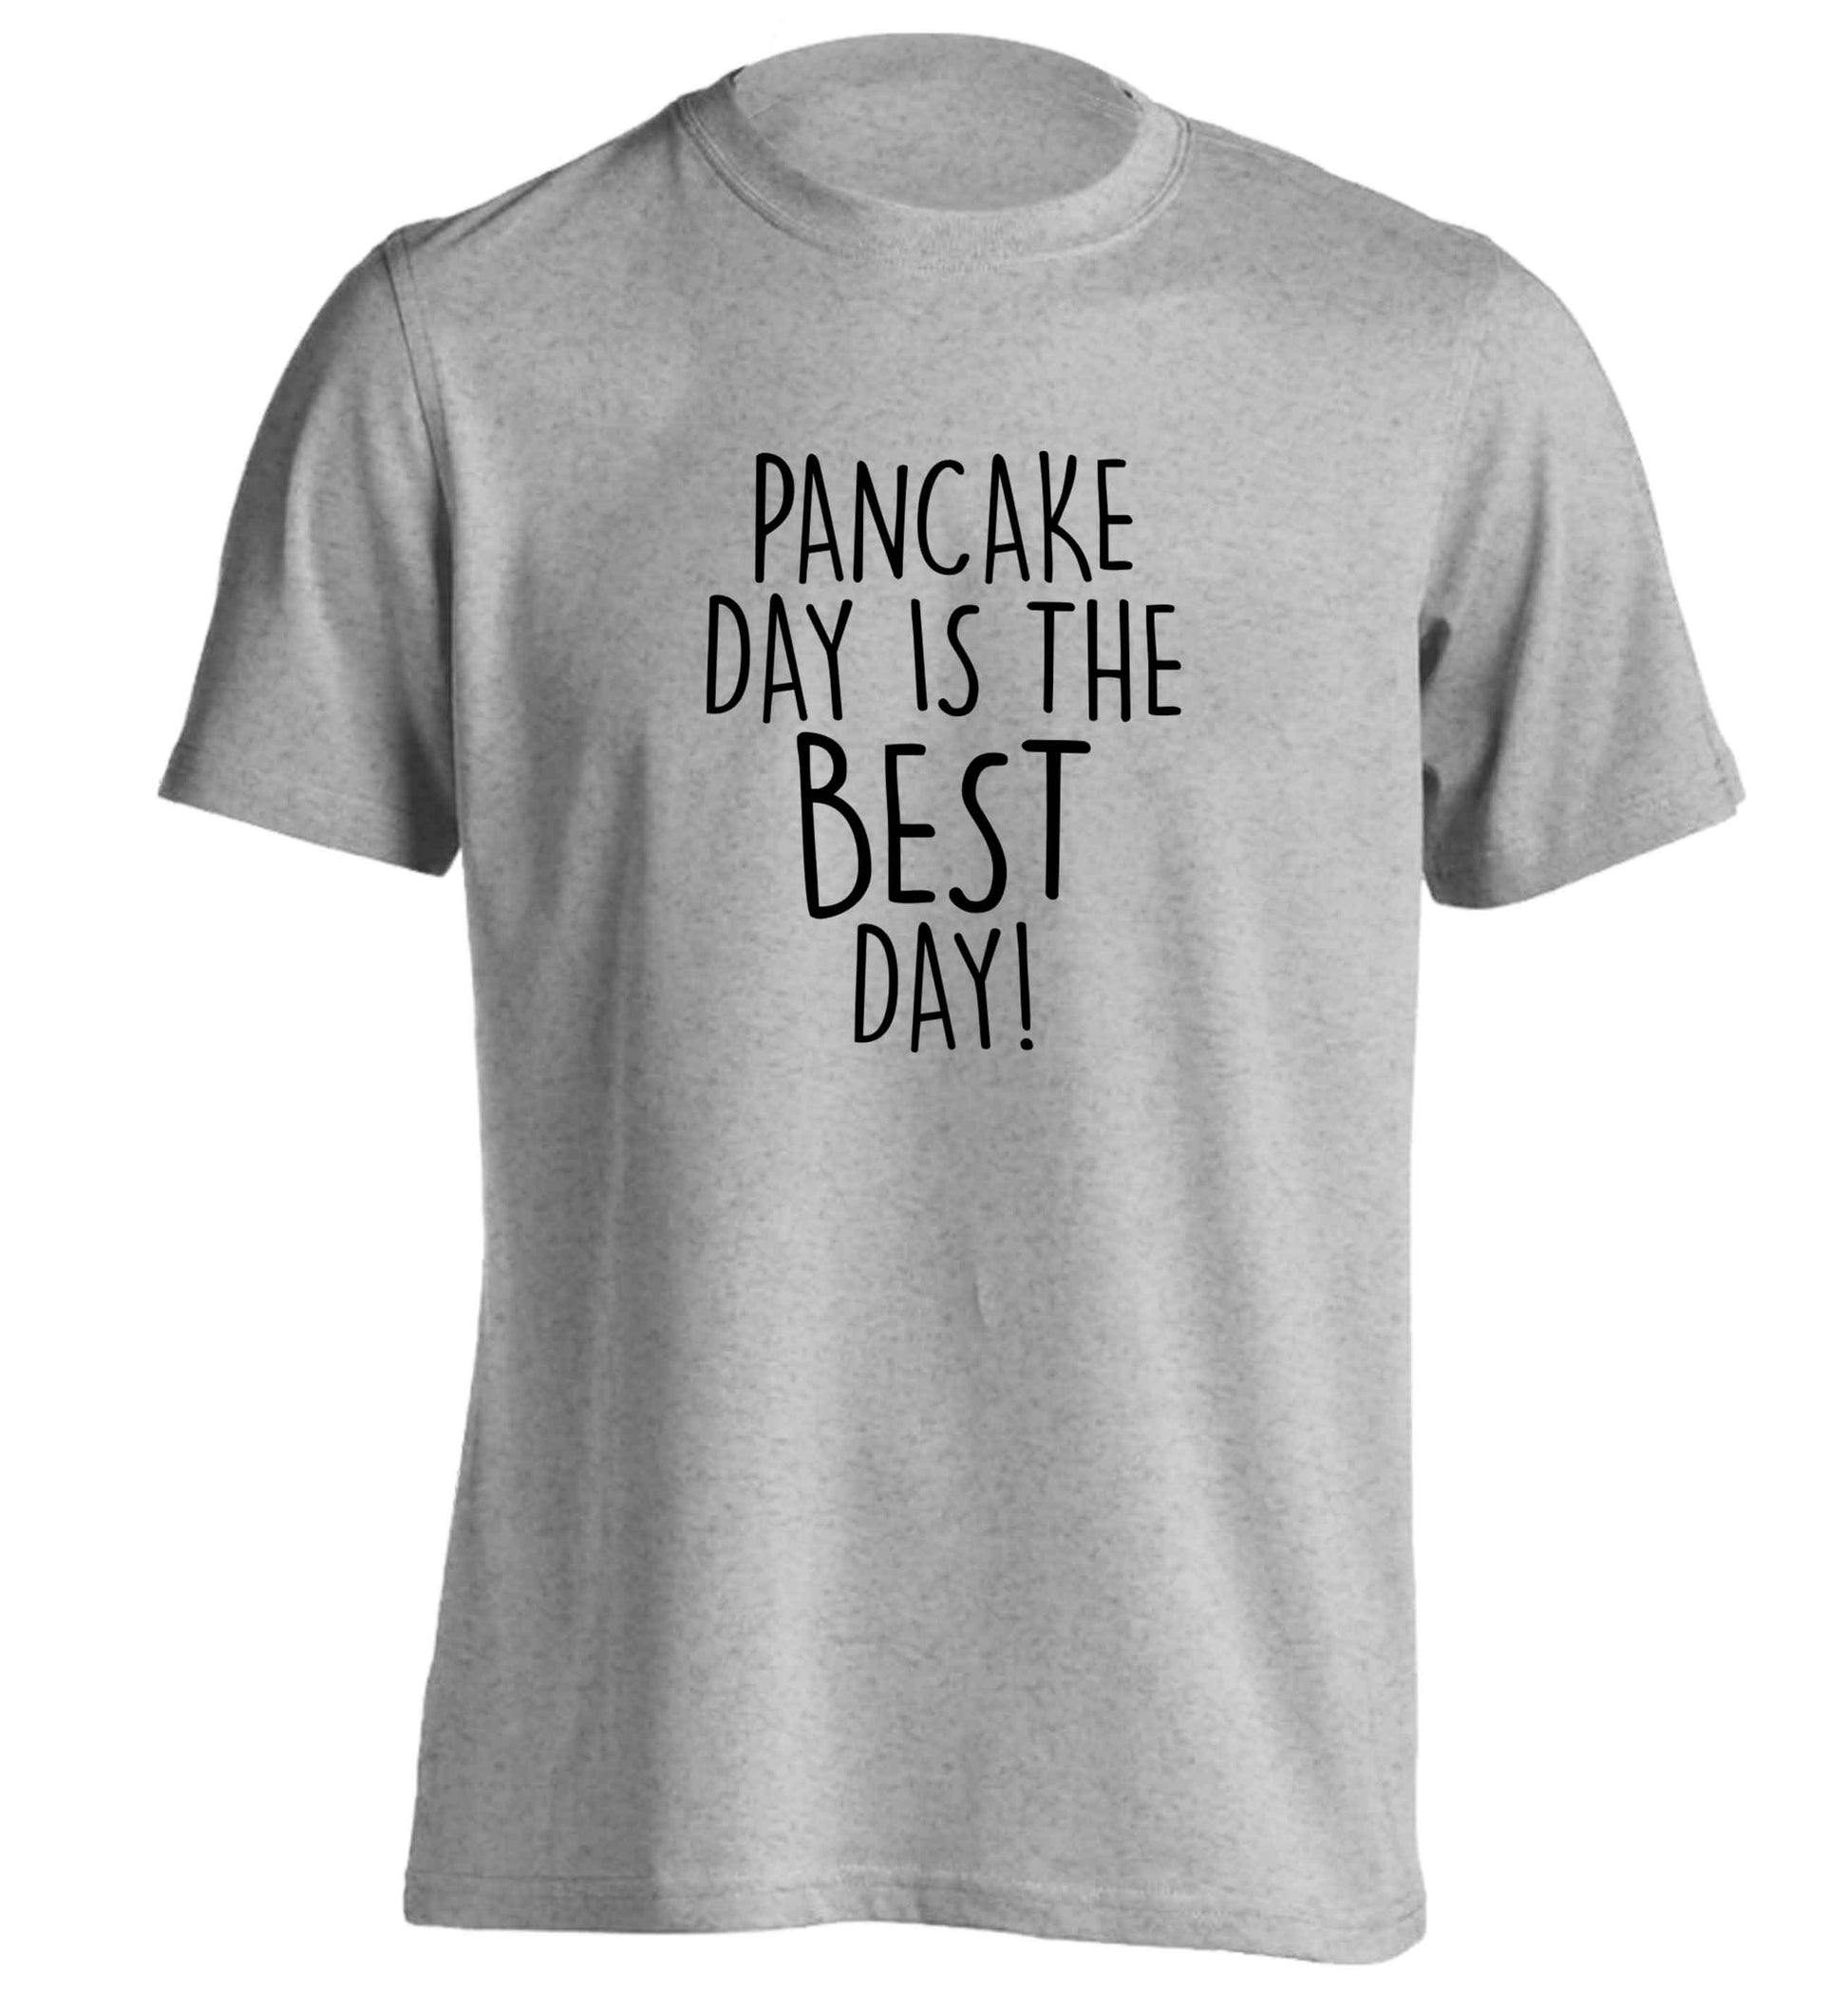 Pancake day is the best day adults unisex grey Tshirt 2XL